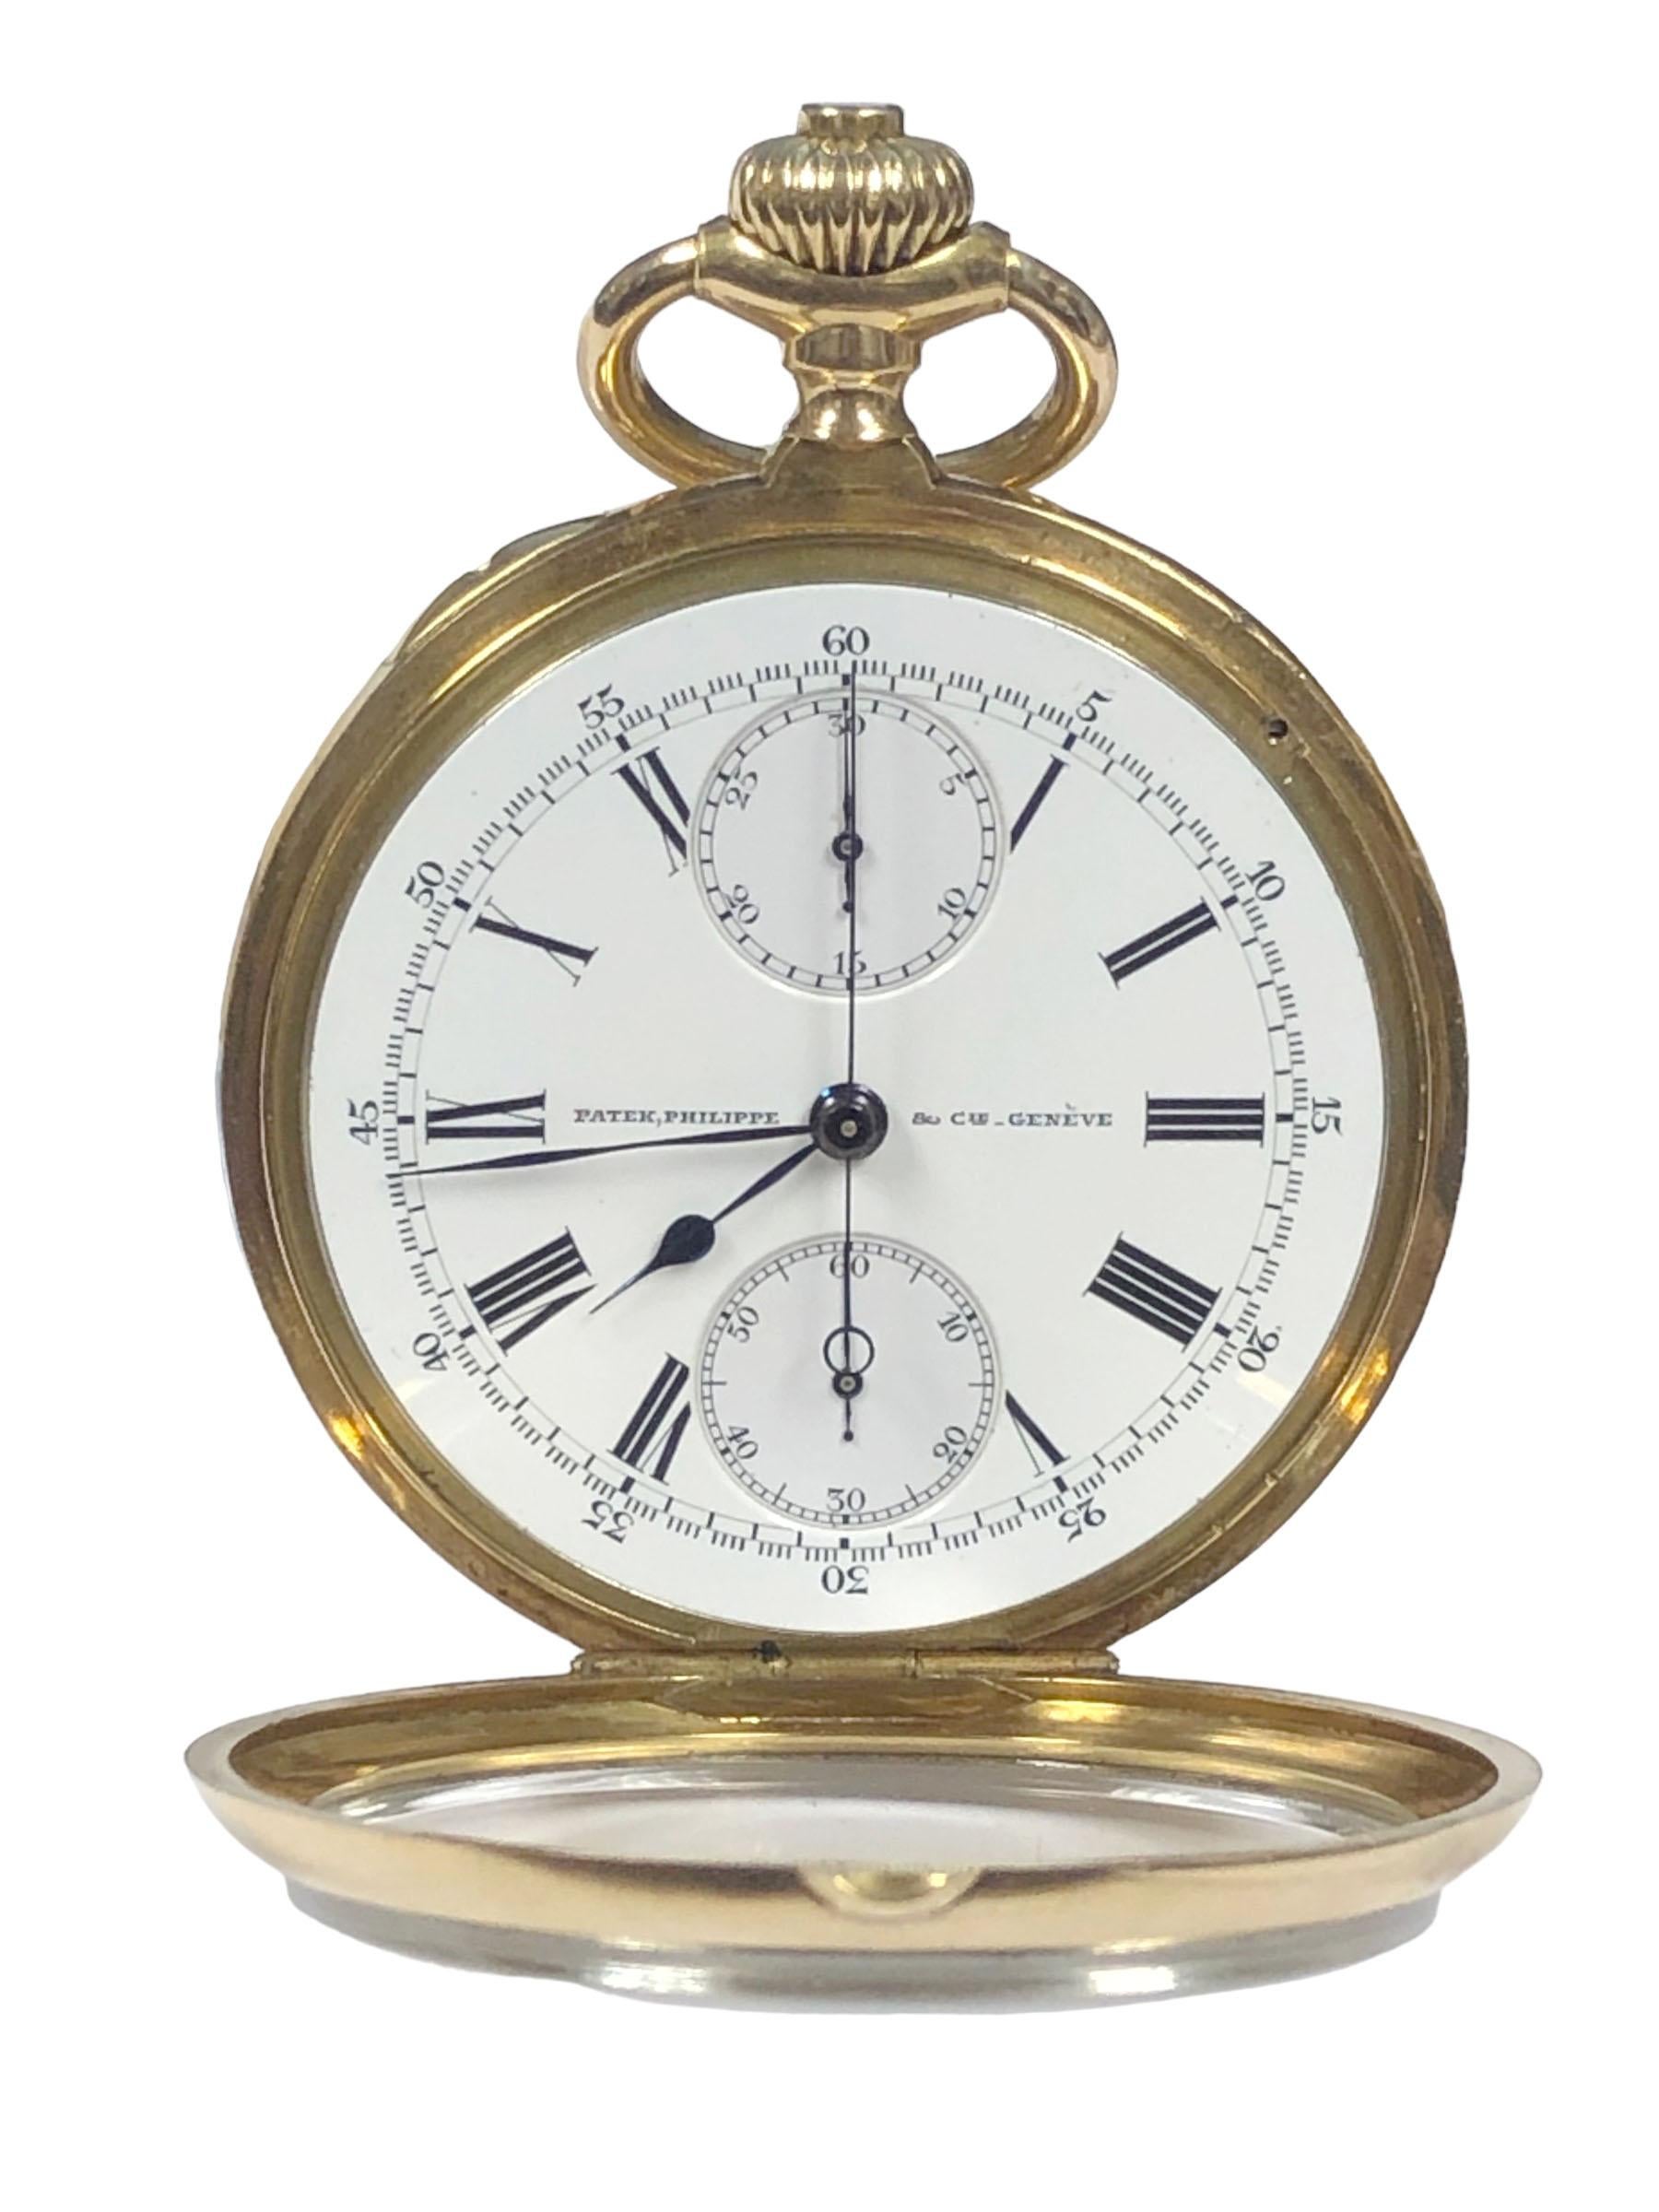 Circa 1909 Patek Philippe Open Face Chronograph Pocket Watch, 50 mm diameter 18k Yellow Gold 3 piece case with inside dust cover, White Porcelain Dial with Black Roman numerals, outer chapter ring calibrated for minutes, subdial for seconds at 6